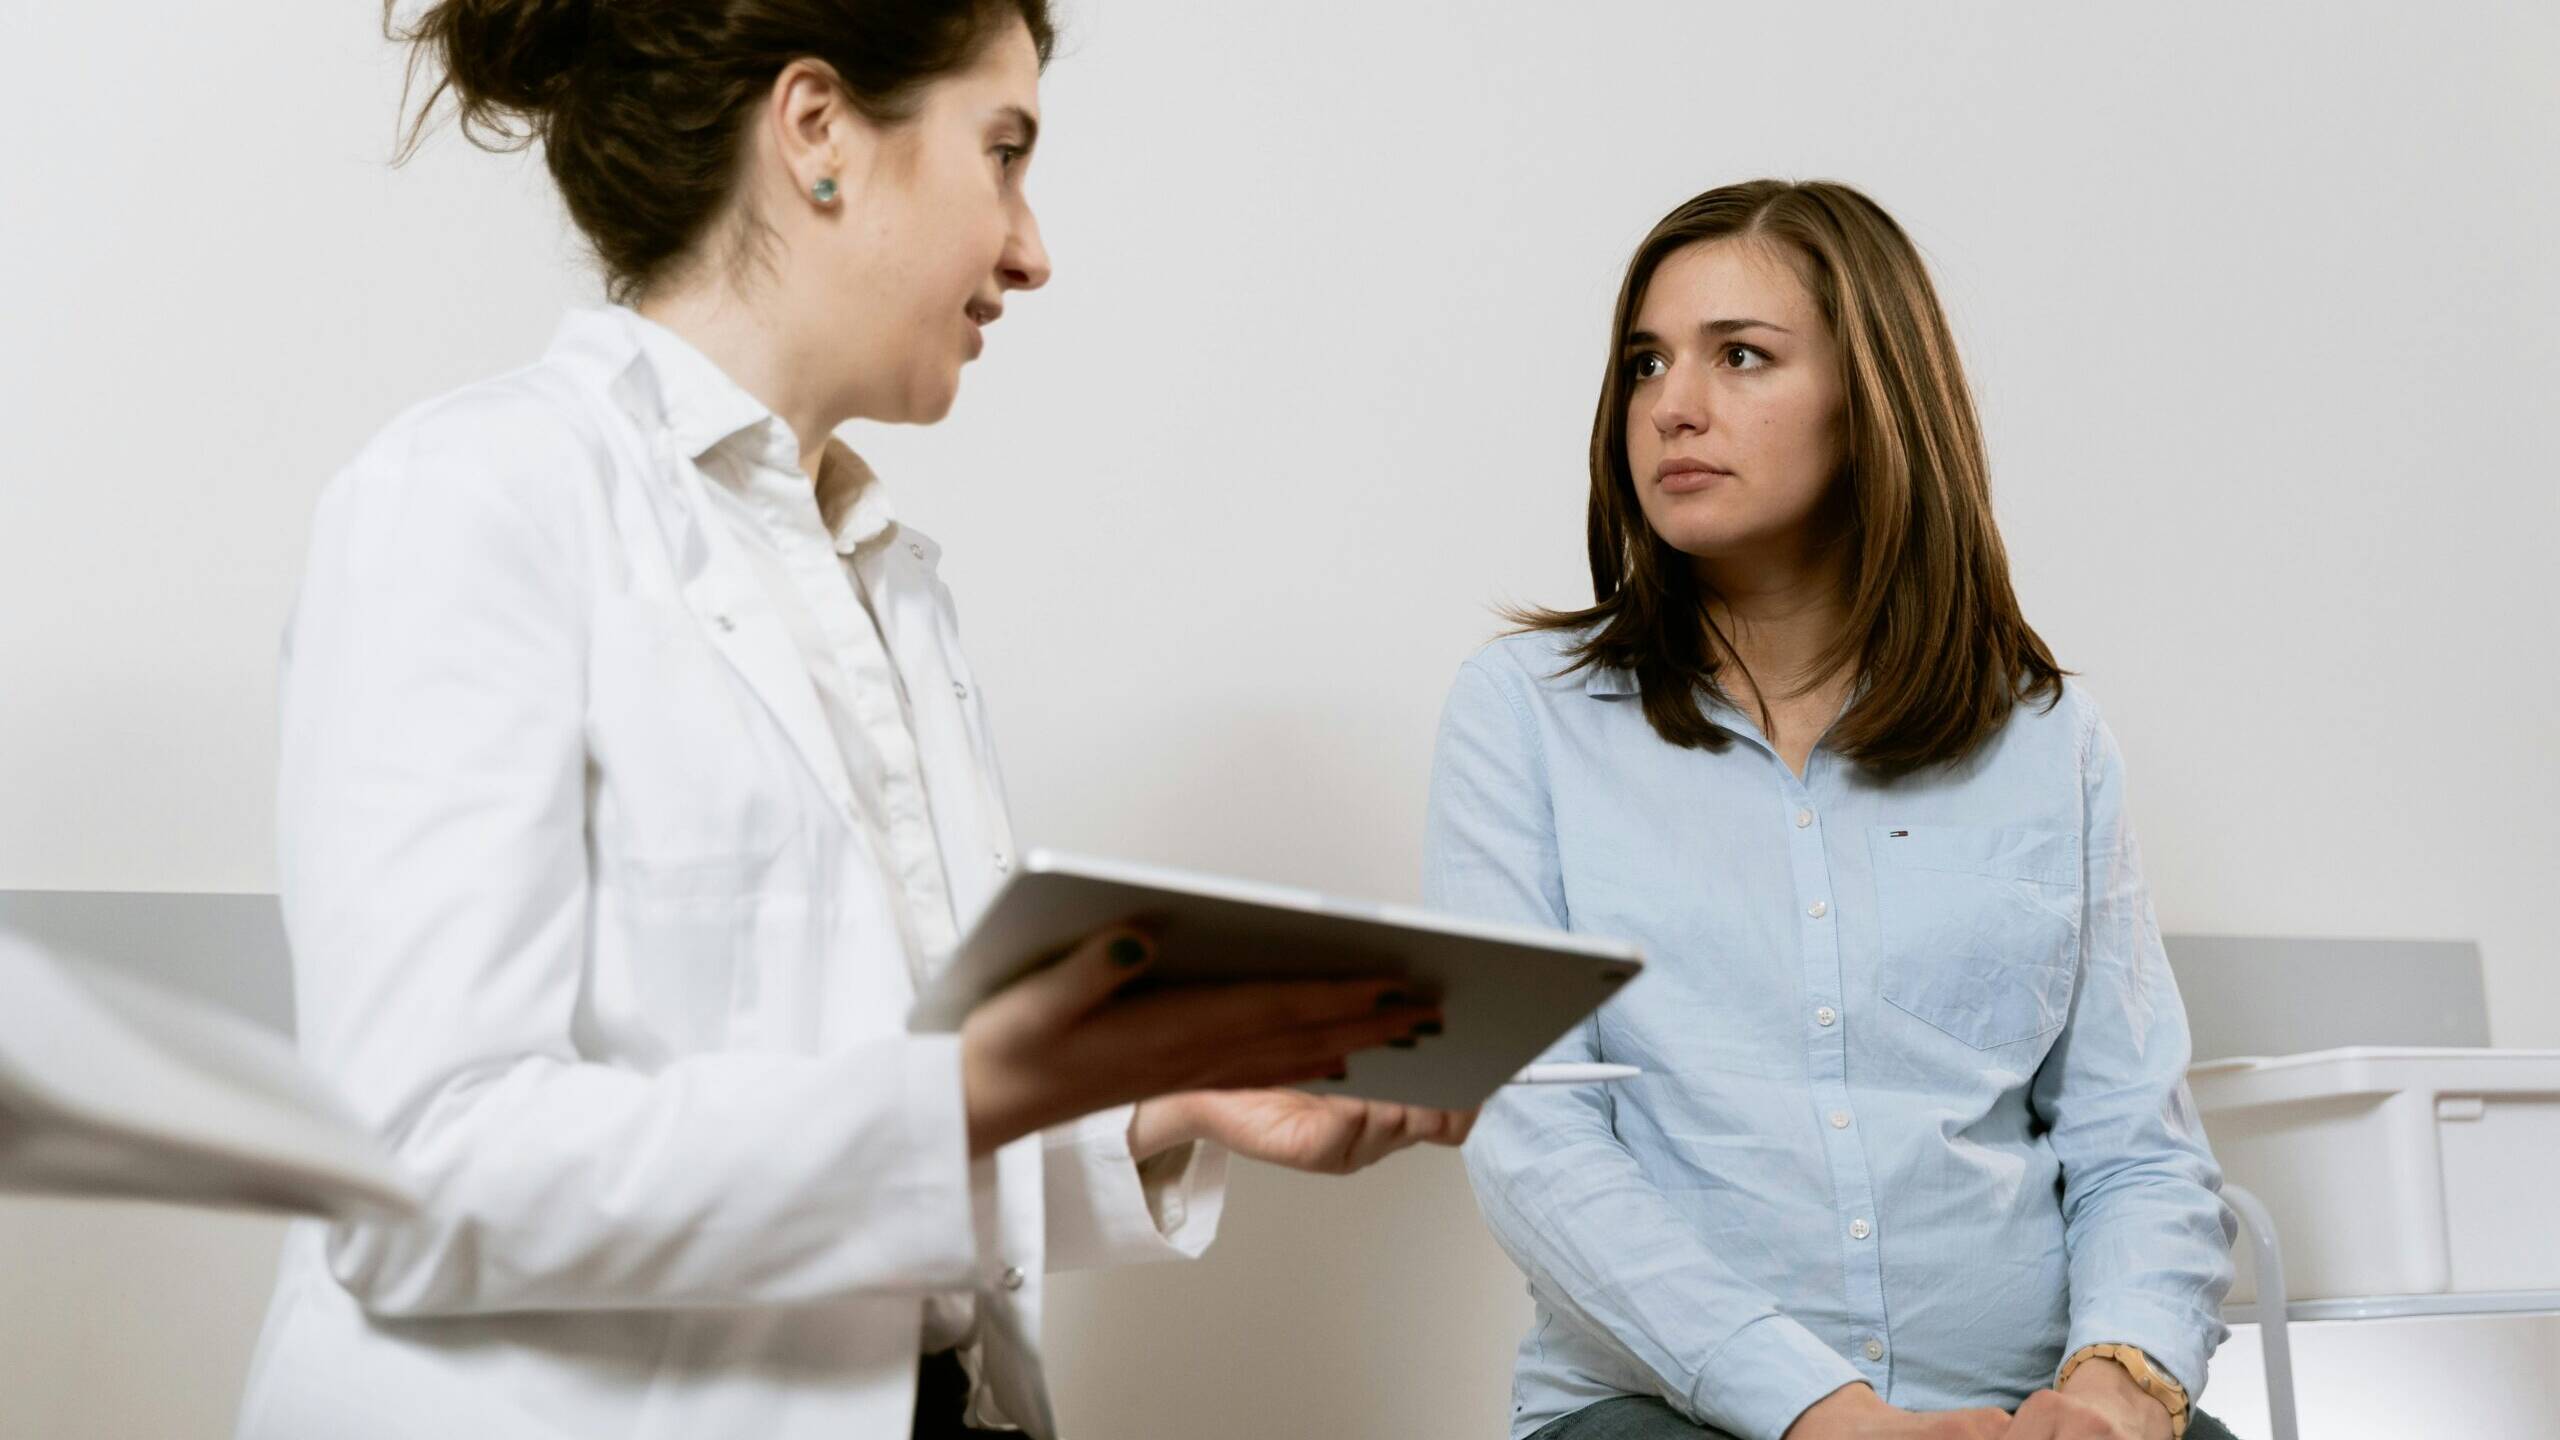 Doctor reviews pregnancy options with patient.